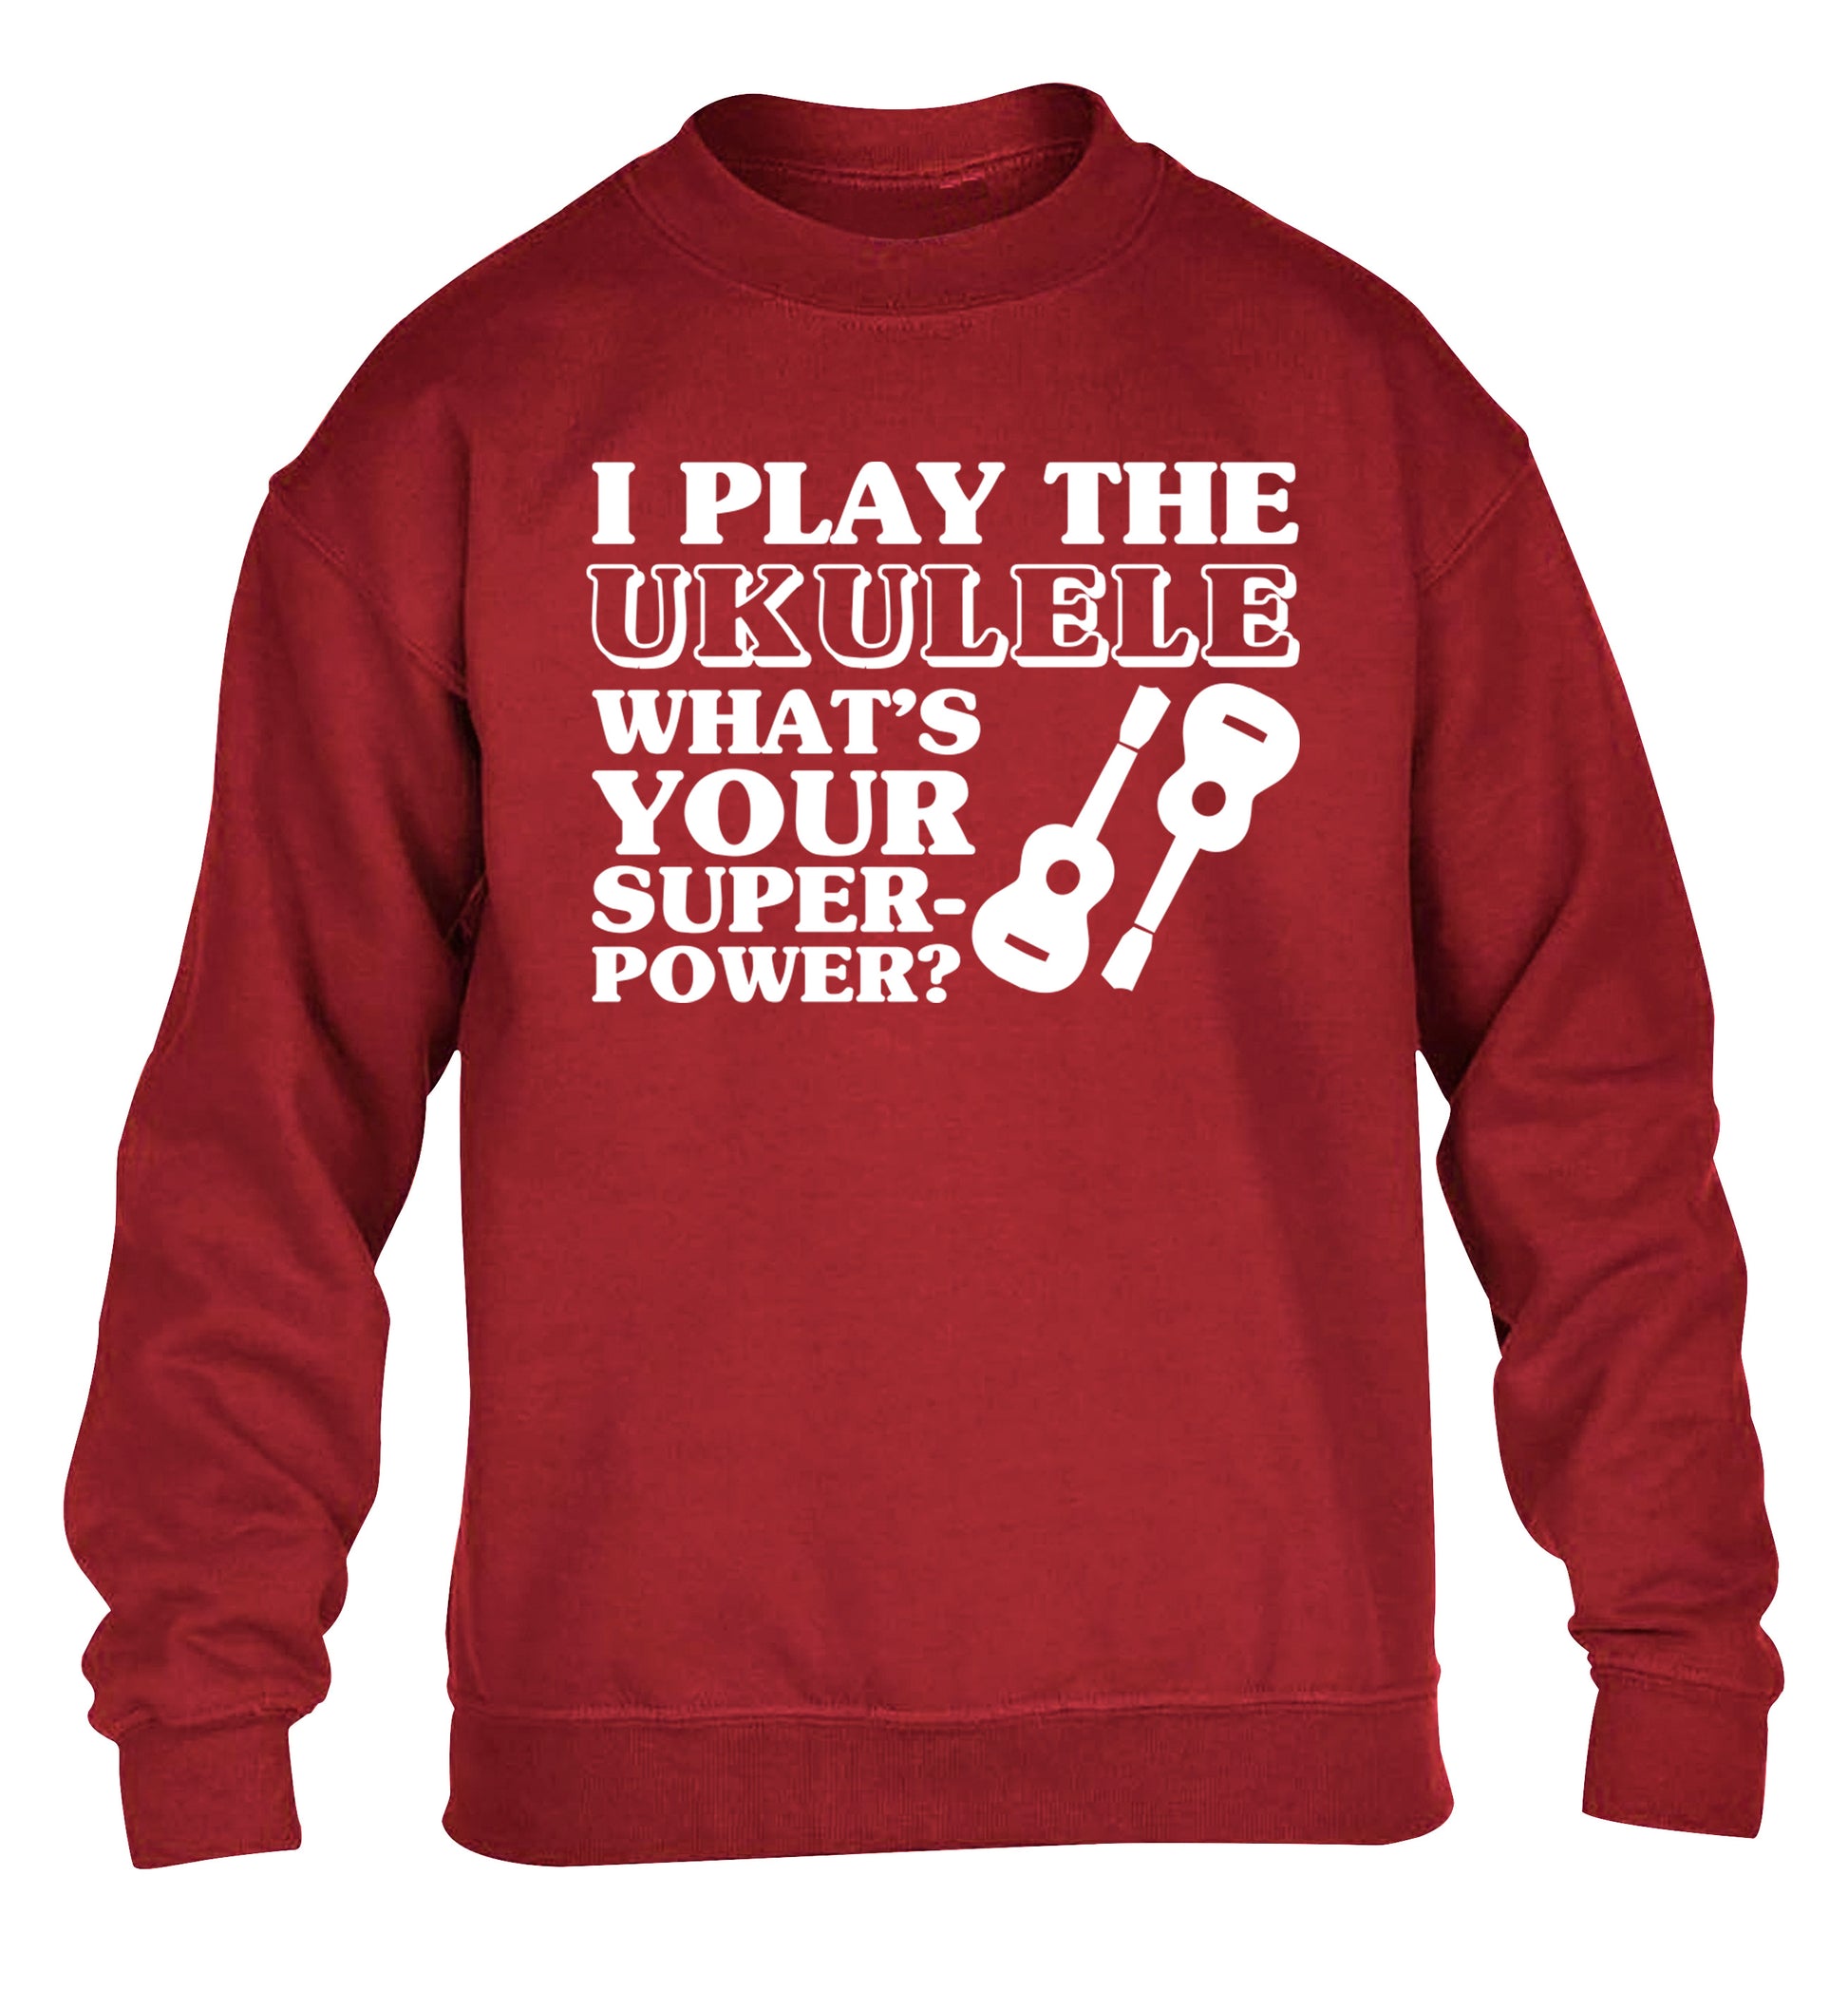 I play the ukulele what's your superpower? children's grey sweater 12-14 Years